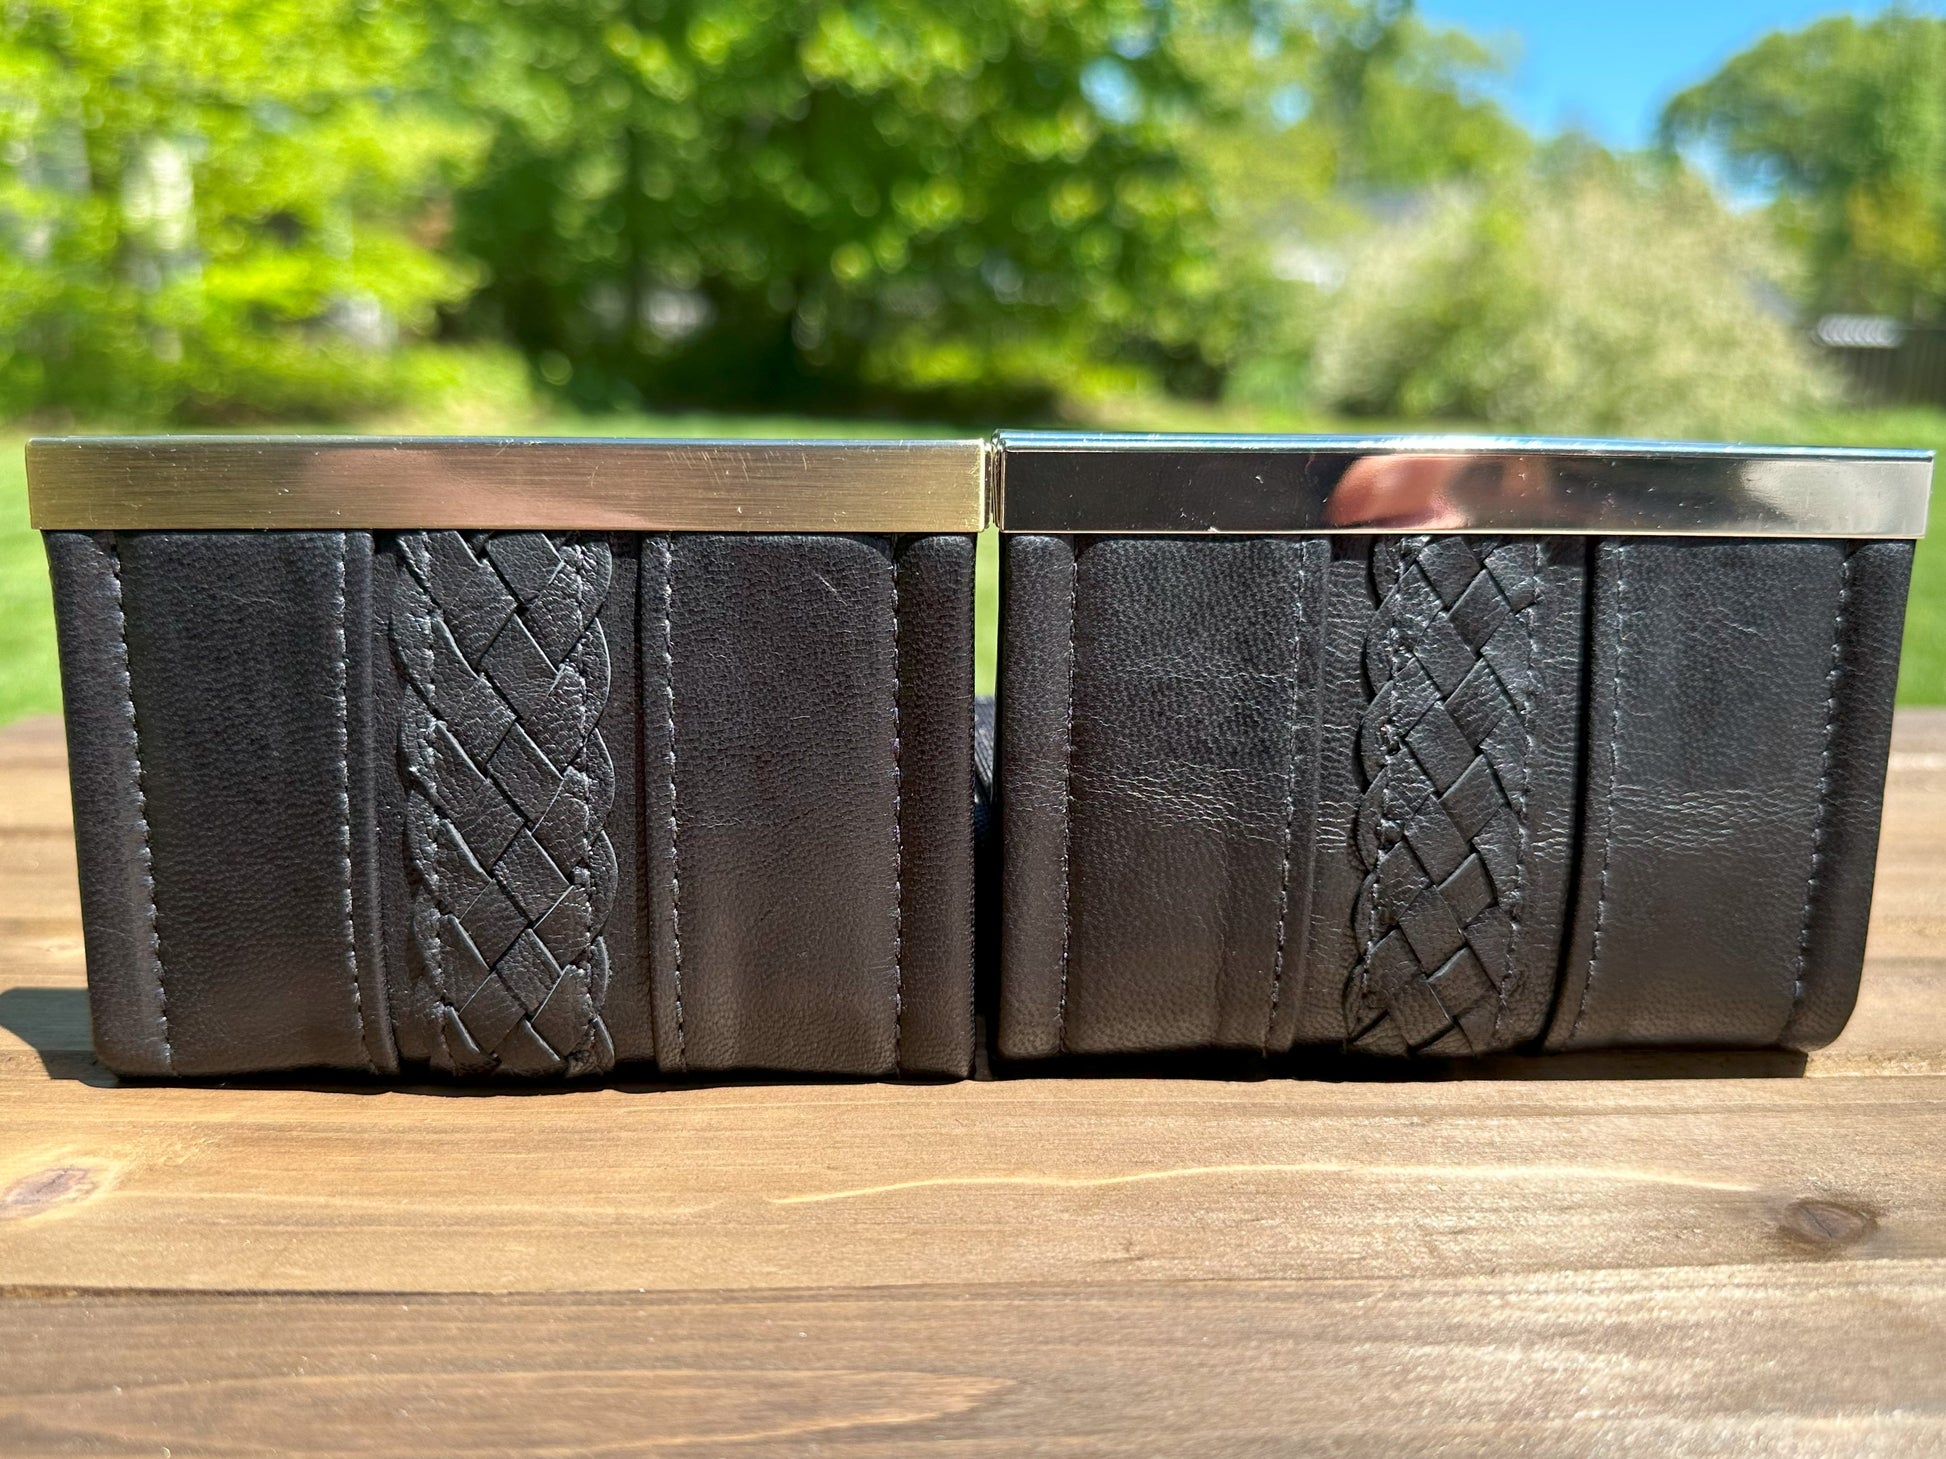 Black Lambskin with Hand Braided detail and Bronze or Nickel Flip-Lock City Dock Wallet squirescanvascreations.com